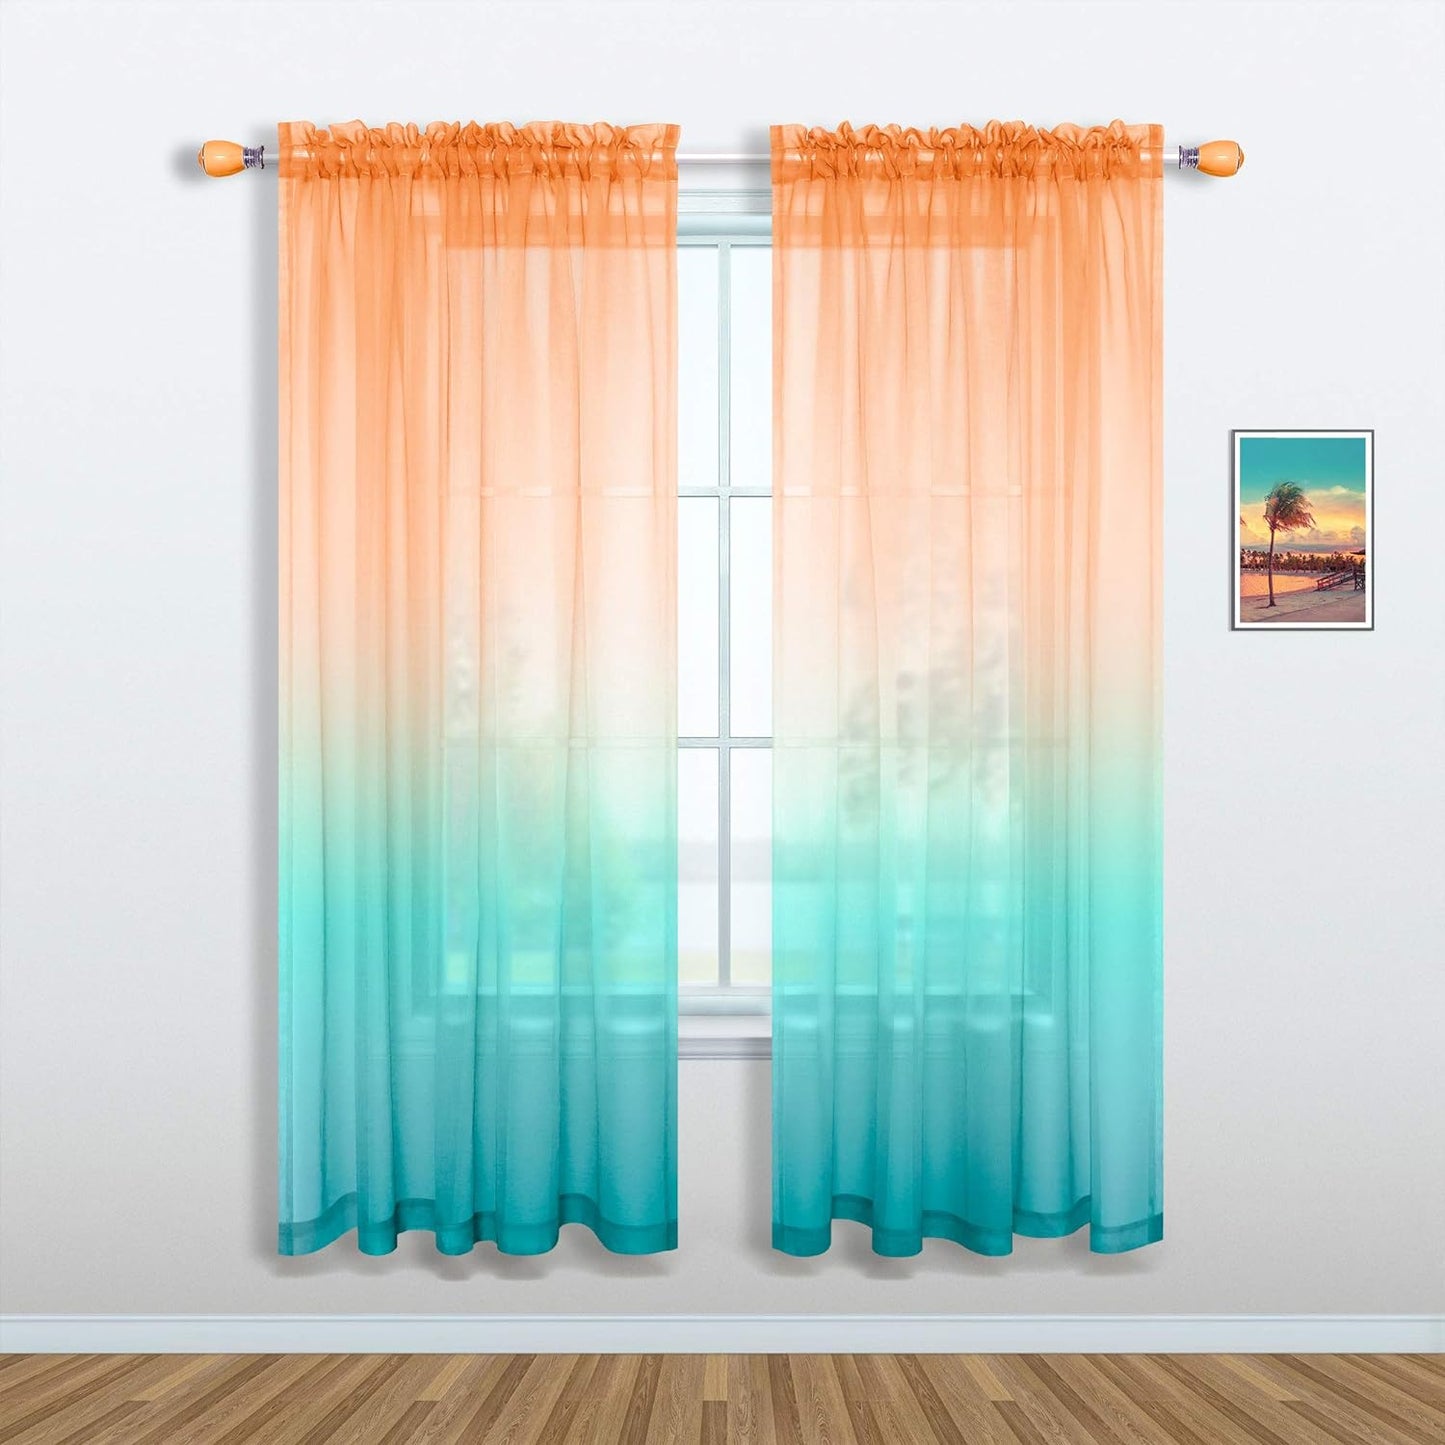 Pink and Purple Curtains for Girls Bedroom Decor Set 1 Single Panel Pocket Window Voile Pastel Sheer Ombre Rainbow Curtain for Kid Room Decoration Teen Princess 63 Inch Length Gradient Lilac Lavender  MRS.NATURALL TEXTILE Orange And Green 52X63 